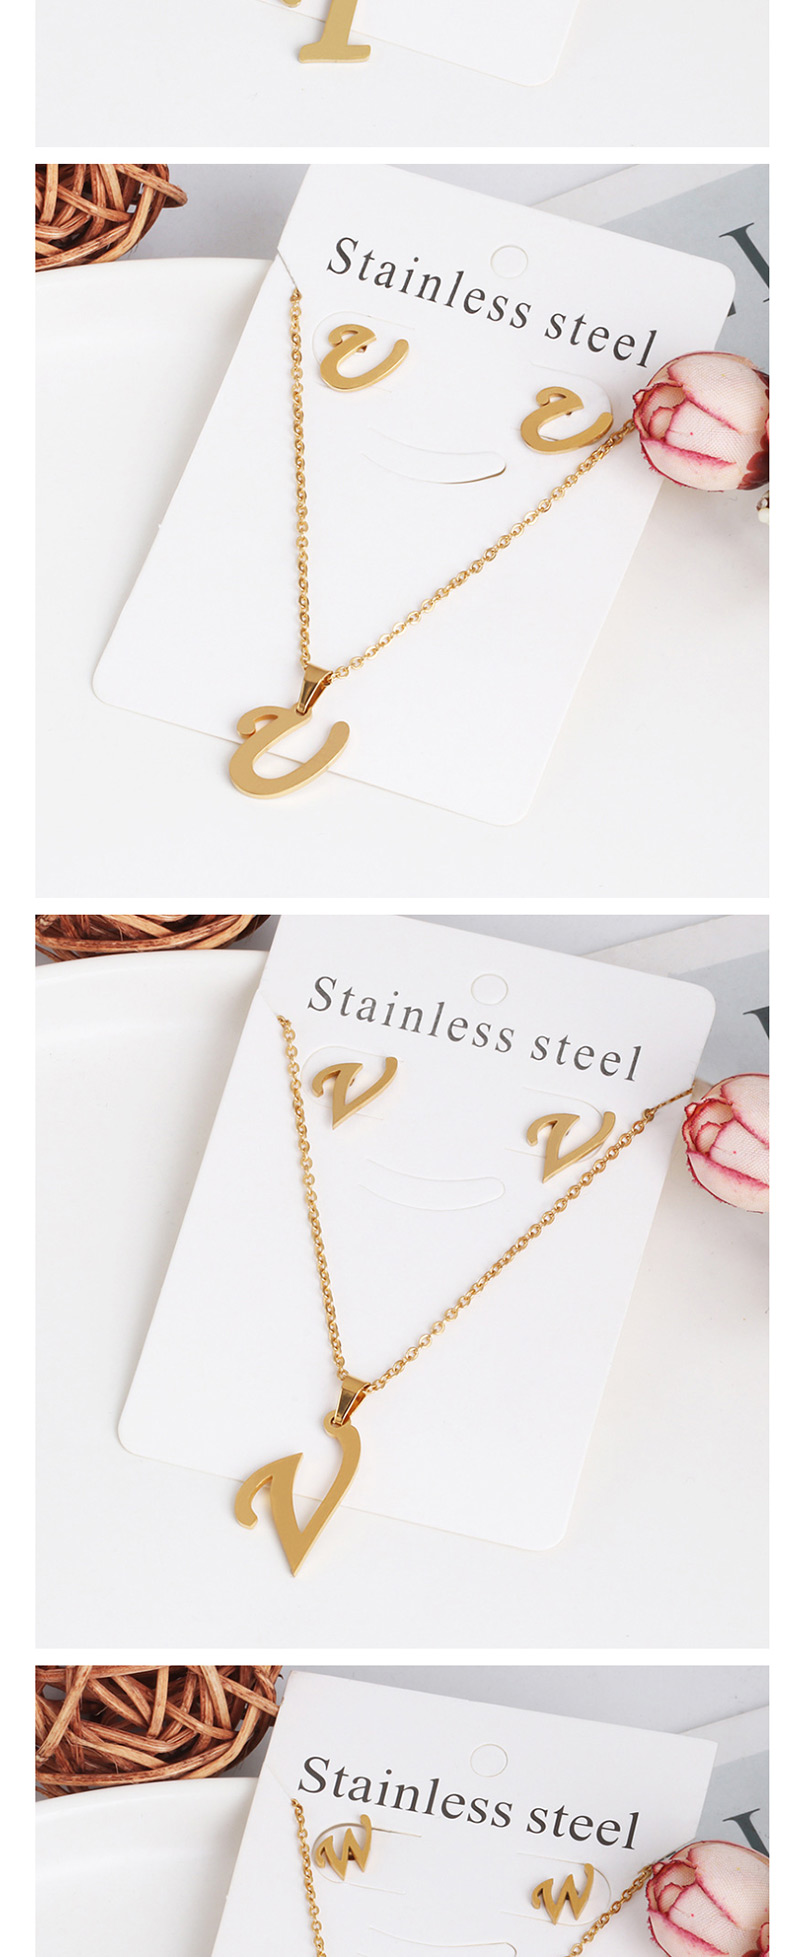 Fashion L Gold Stainless Steel Letter Necklace Earrings Two-piece,Jewelry Sets